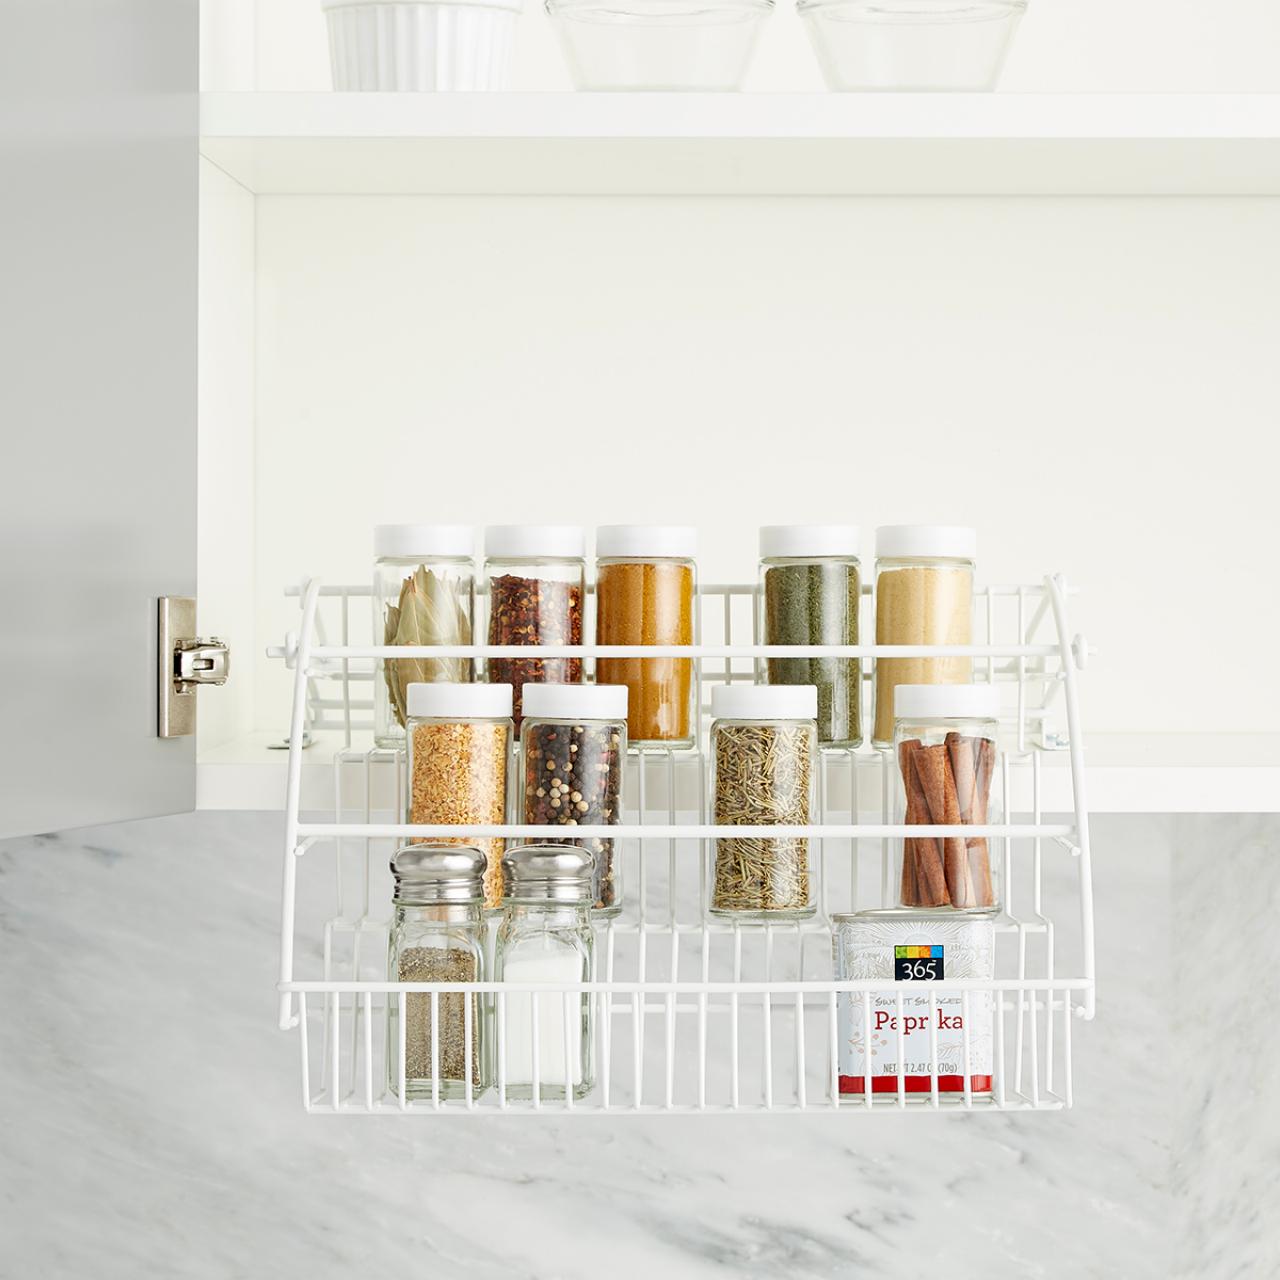 https://hgtvhome.sndimg.com/content/dam/images/hgtv/products/2021/2/3/2/rx_container-store_pull-down-spice-rack.rend.hgtvcom.1280.1280.suffix/1612365253112.jpeg